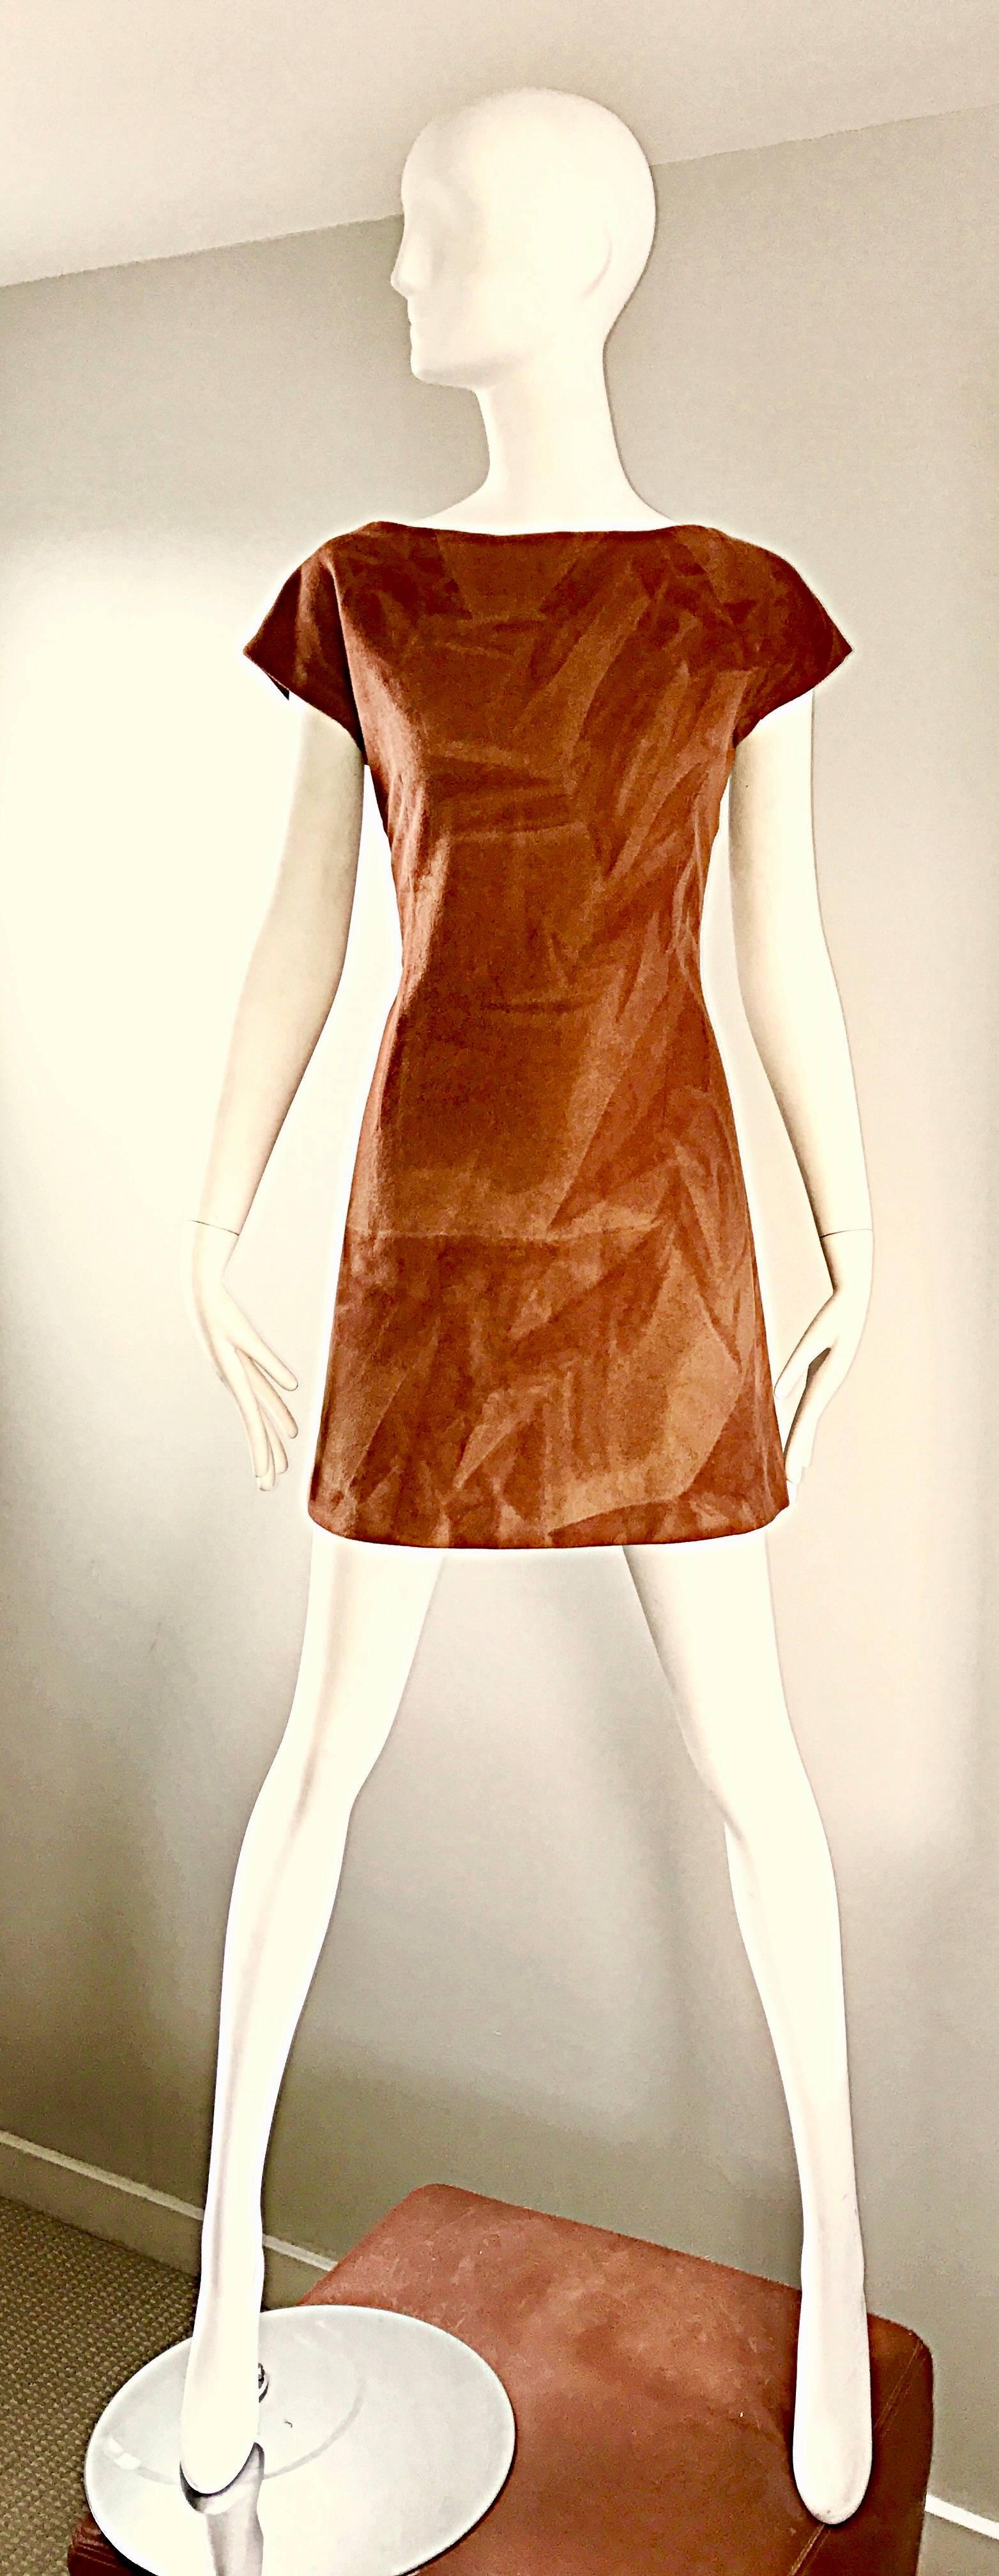 Rare and so chic vintage 1960s early FENDI by KARL LAGERFELD rust and brown colored virgin wool A-Line shift dress! From the hard to find Fendissime label that Lagerfeld created in 1963 for a more fashion forward woman. Features an abstract optical